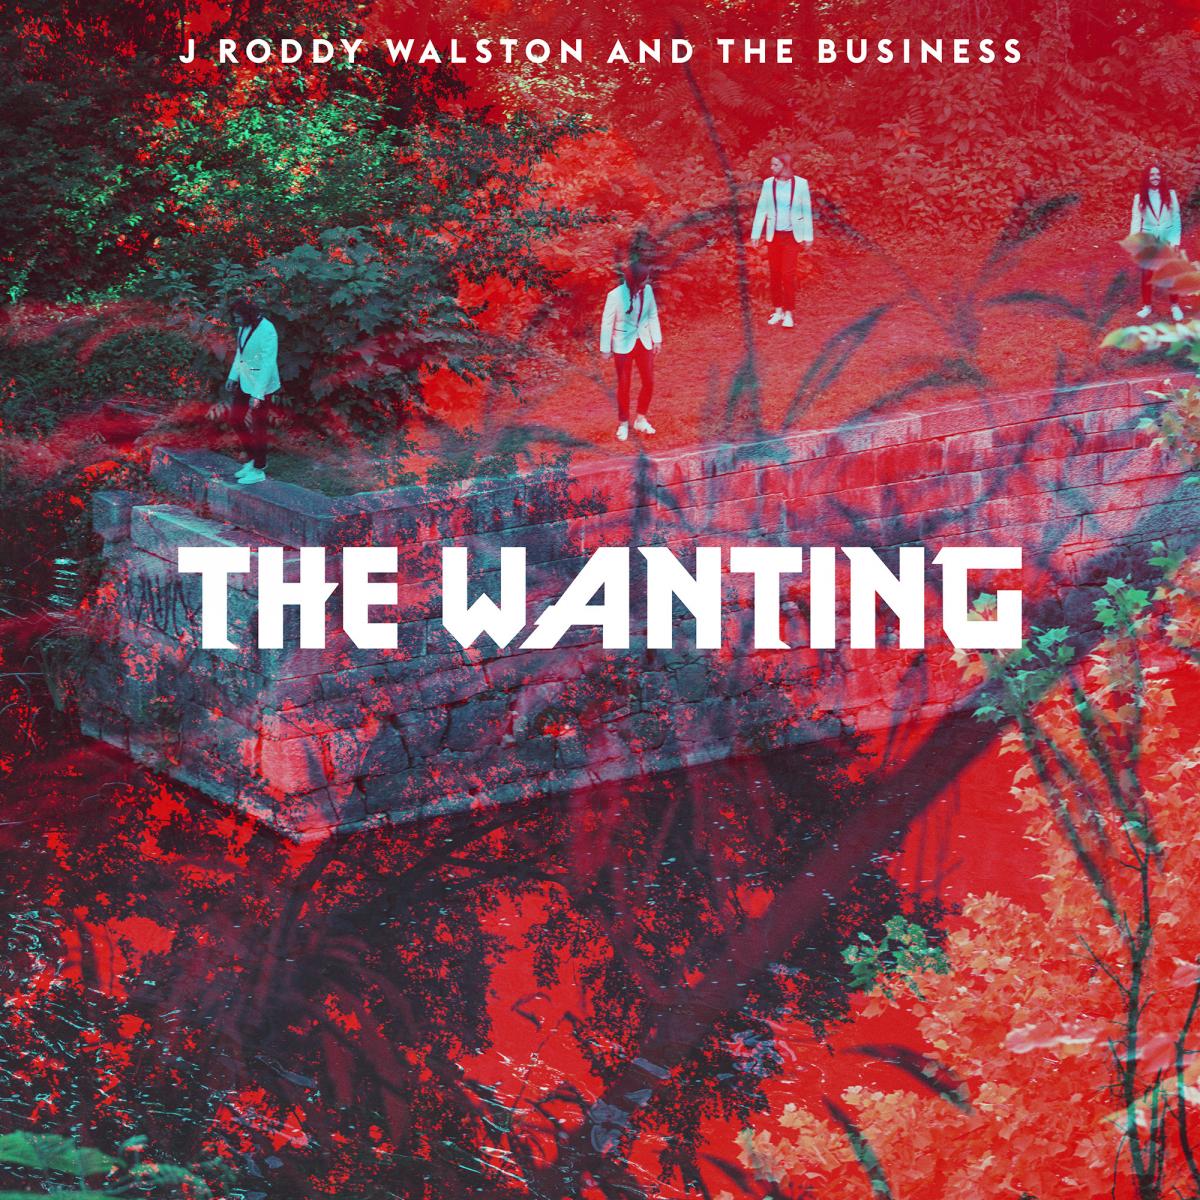 J. Roddy Walston & The Business Reveal New Single "The Wanting"